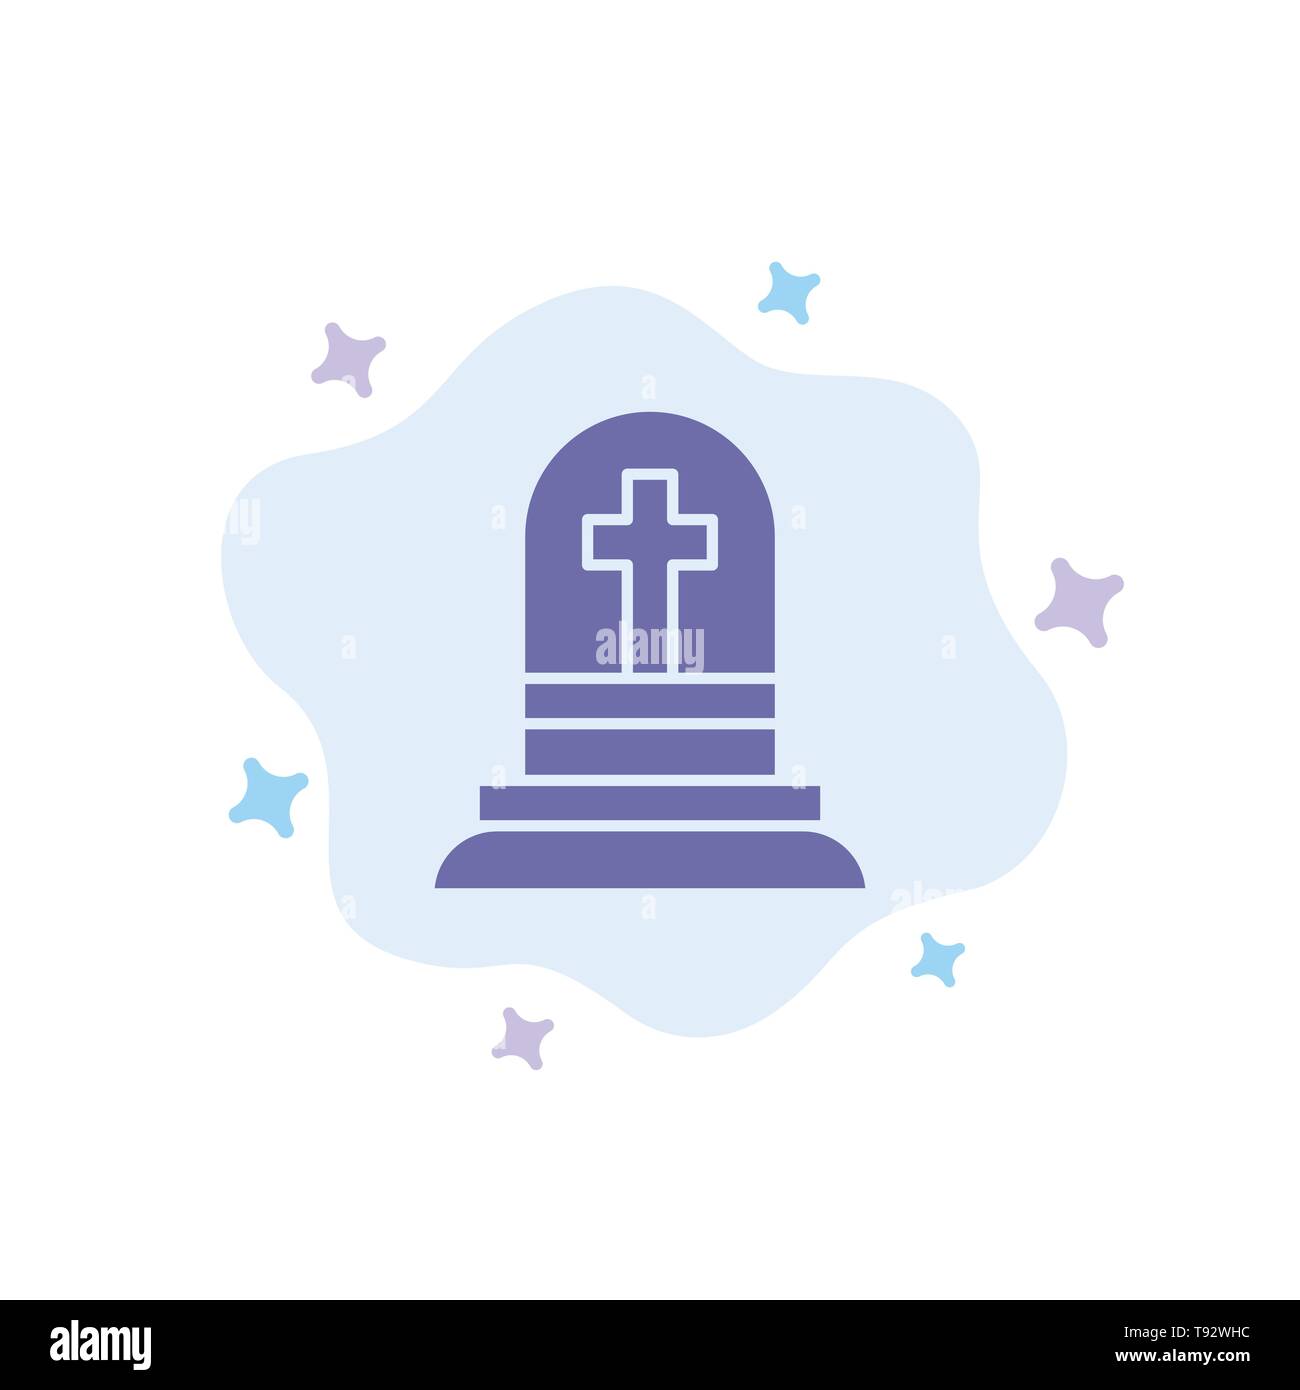 Death, Grave, Gravestone, Rip Blue Icon on Abstract Cloud Background Stock Vector